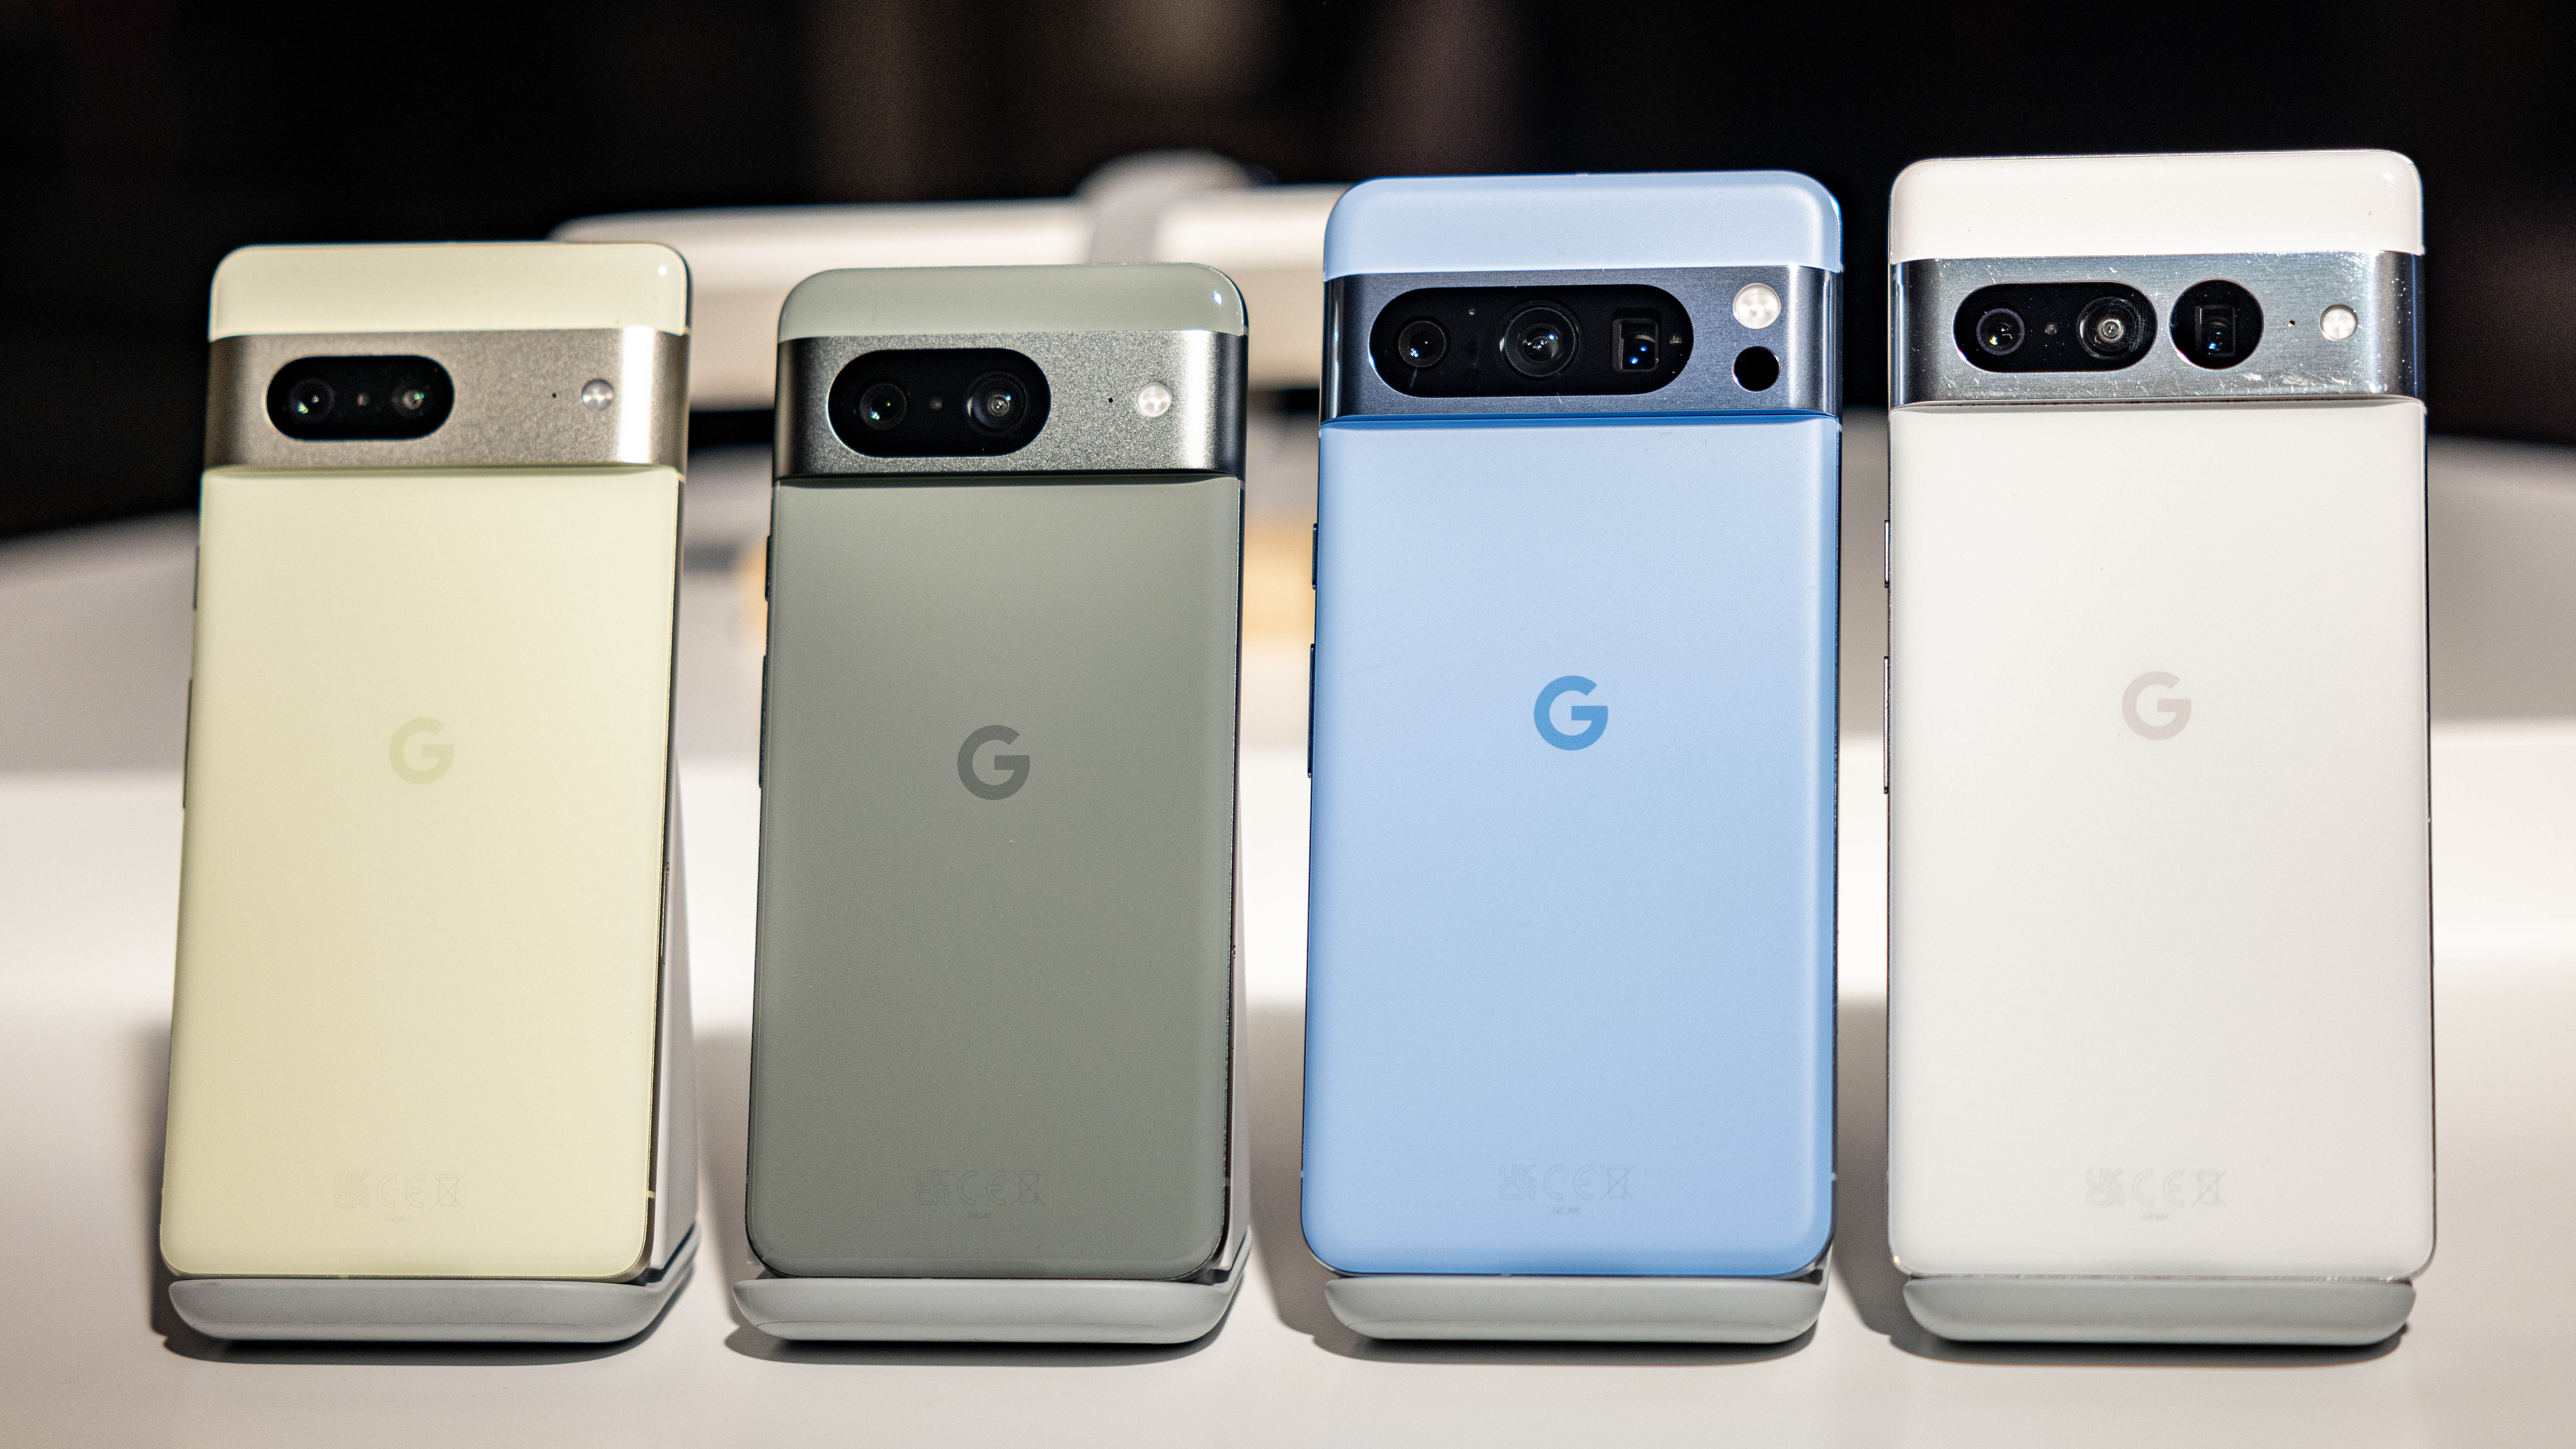 Google Pixel 7a 5G Deals on Three: Compare Prices & Save (Feb 24)